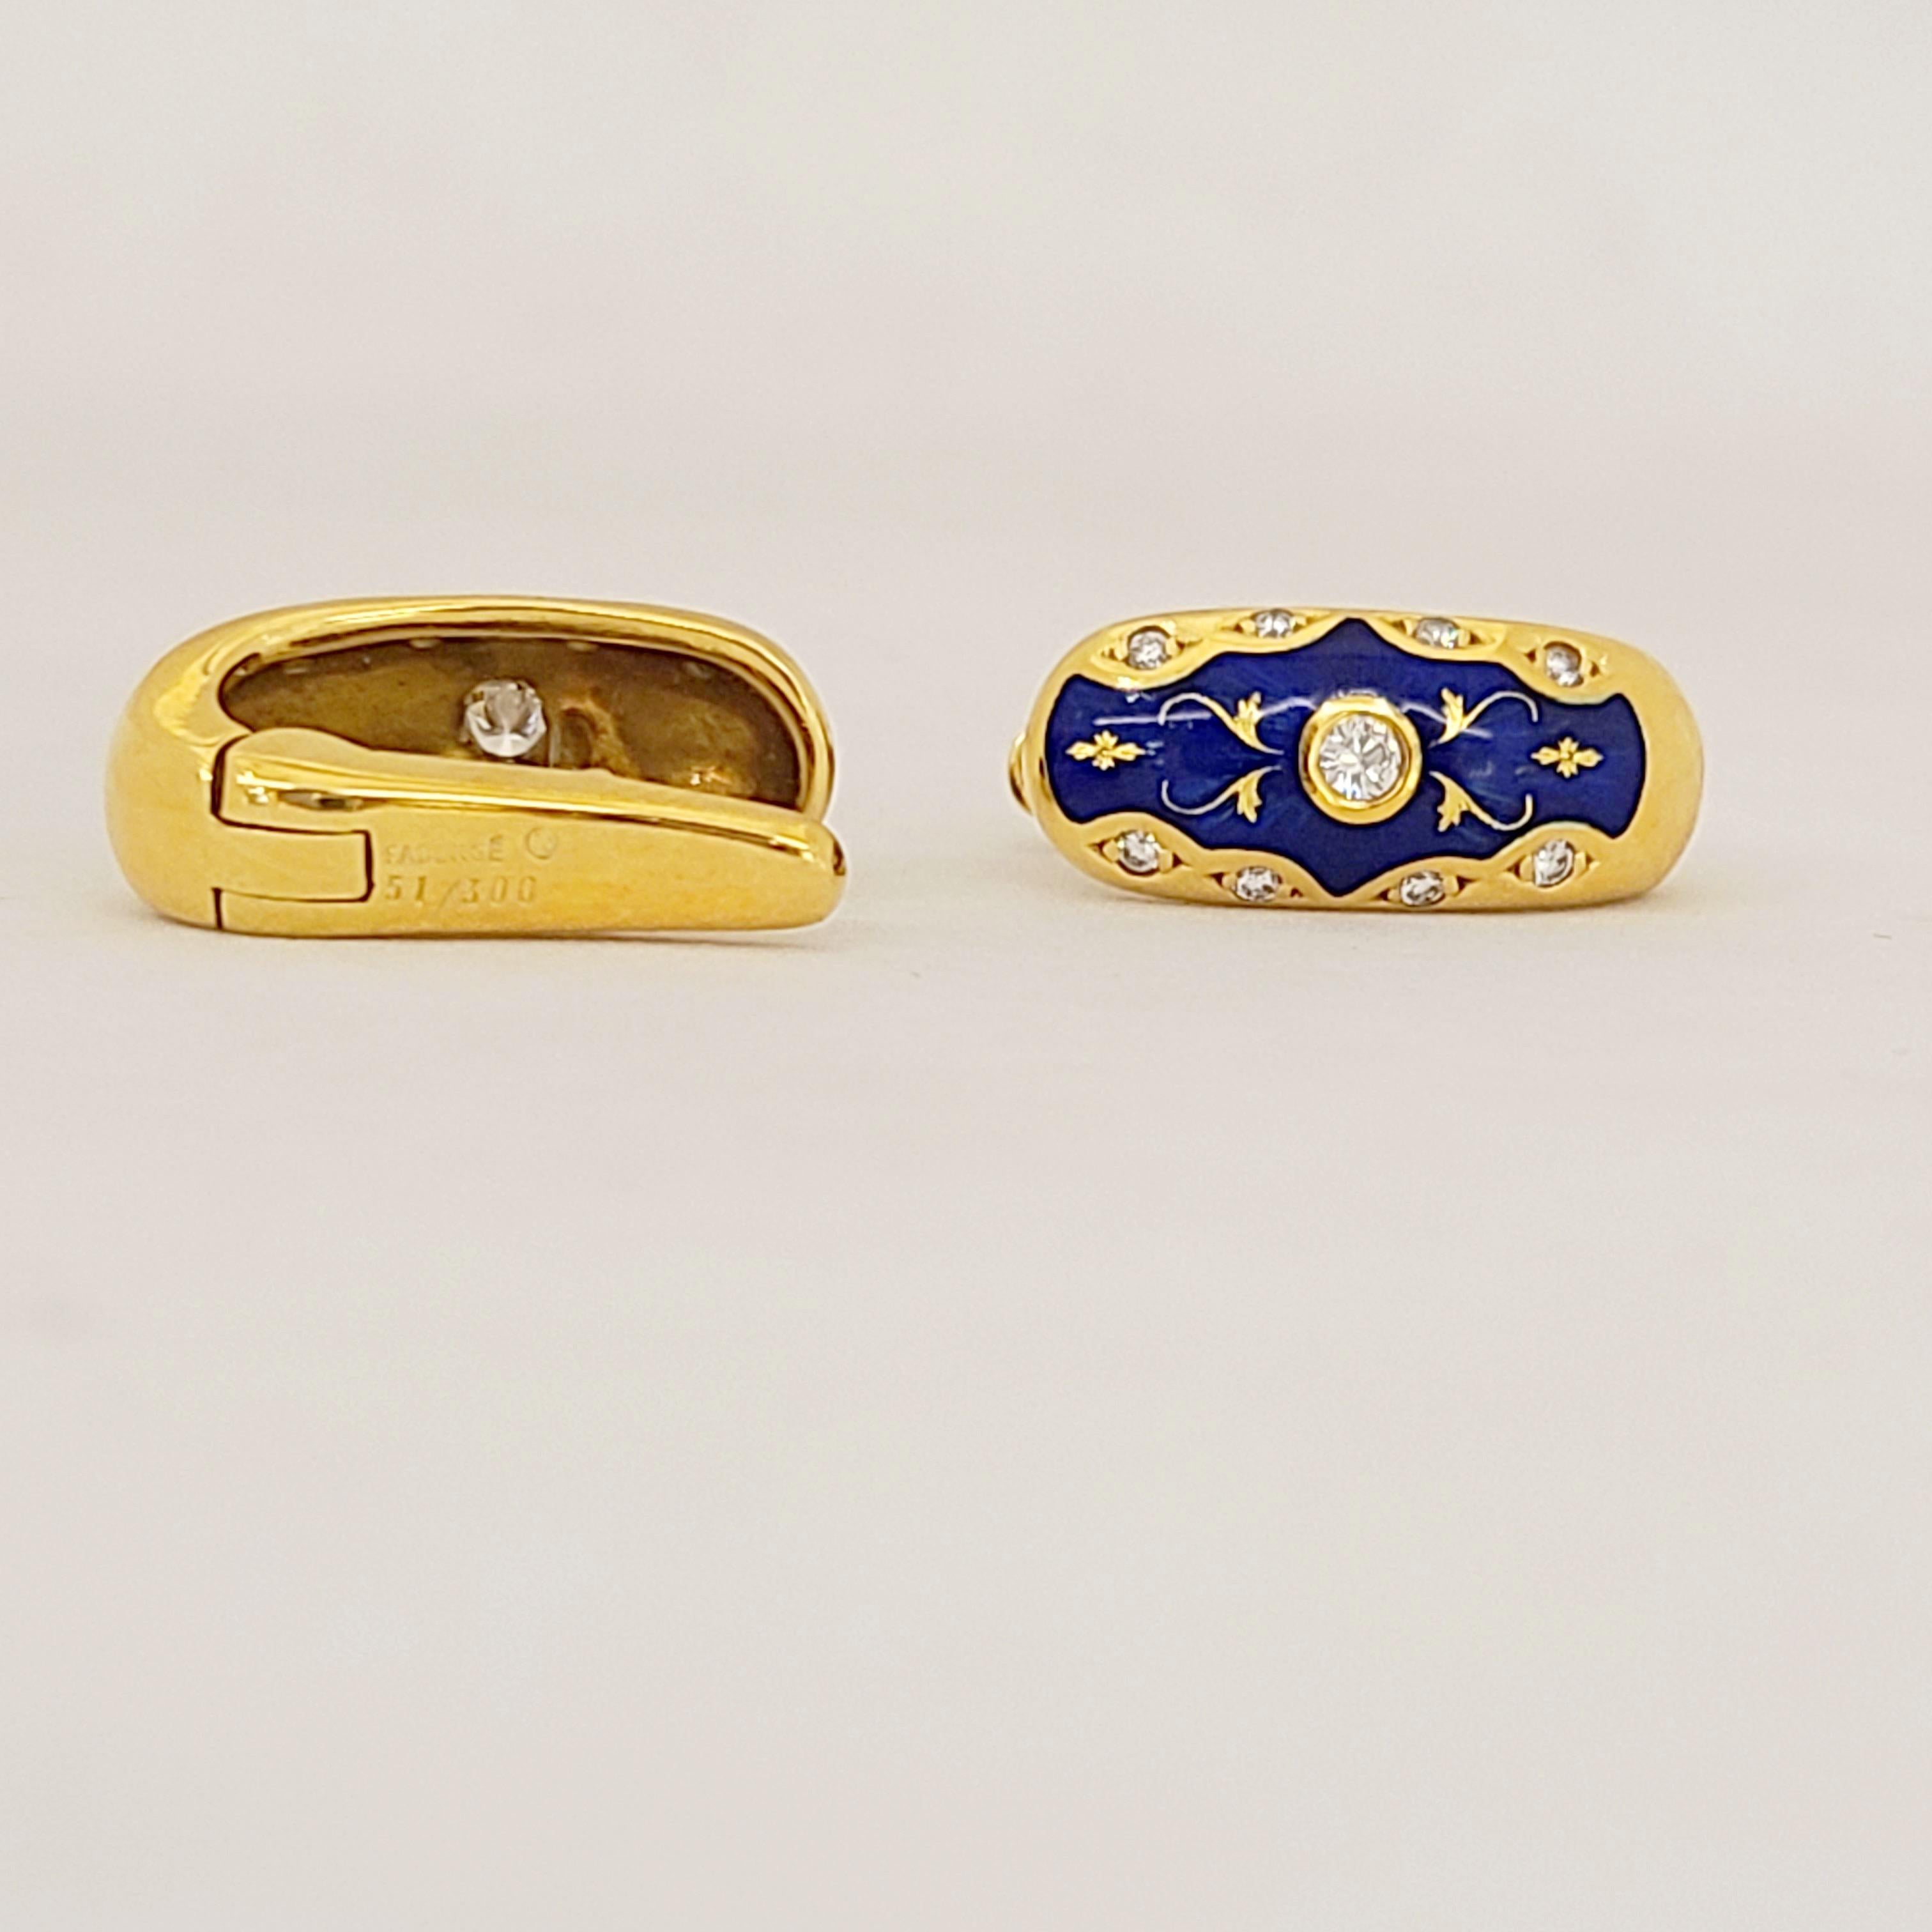 These modern Faberge 18 karat yellow gold huggy style pierced earrings center a bezel set round brilliant diamond. The earrings are crafted in a brilliant blue enamel, accented with diamonds and gold detailing.
The earrings were created by Victor